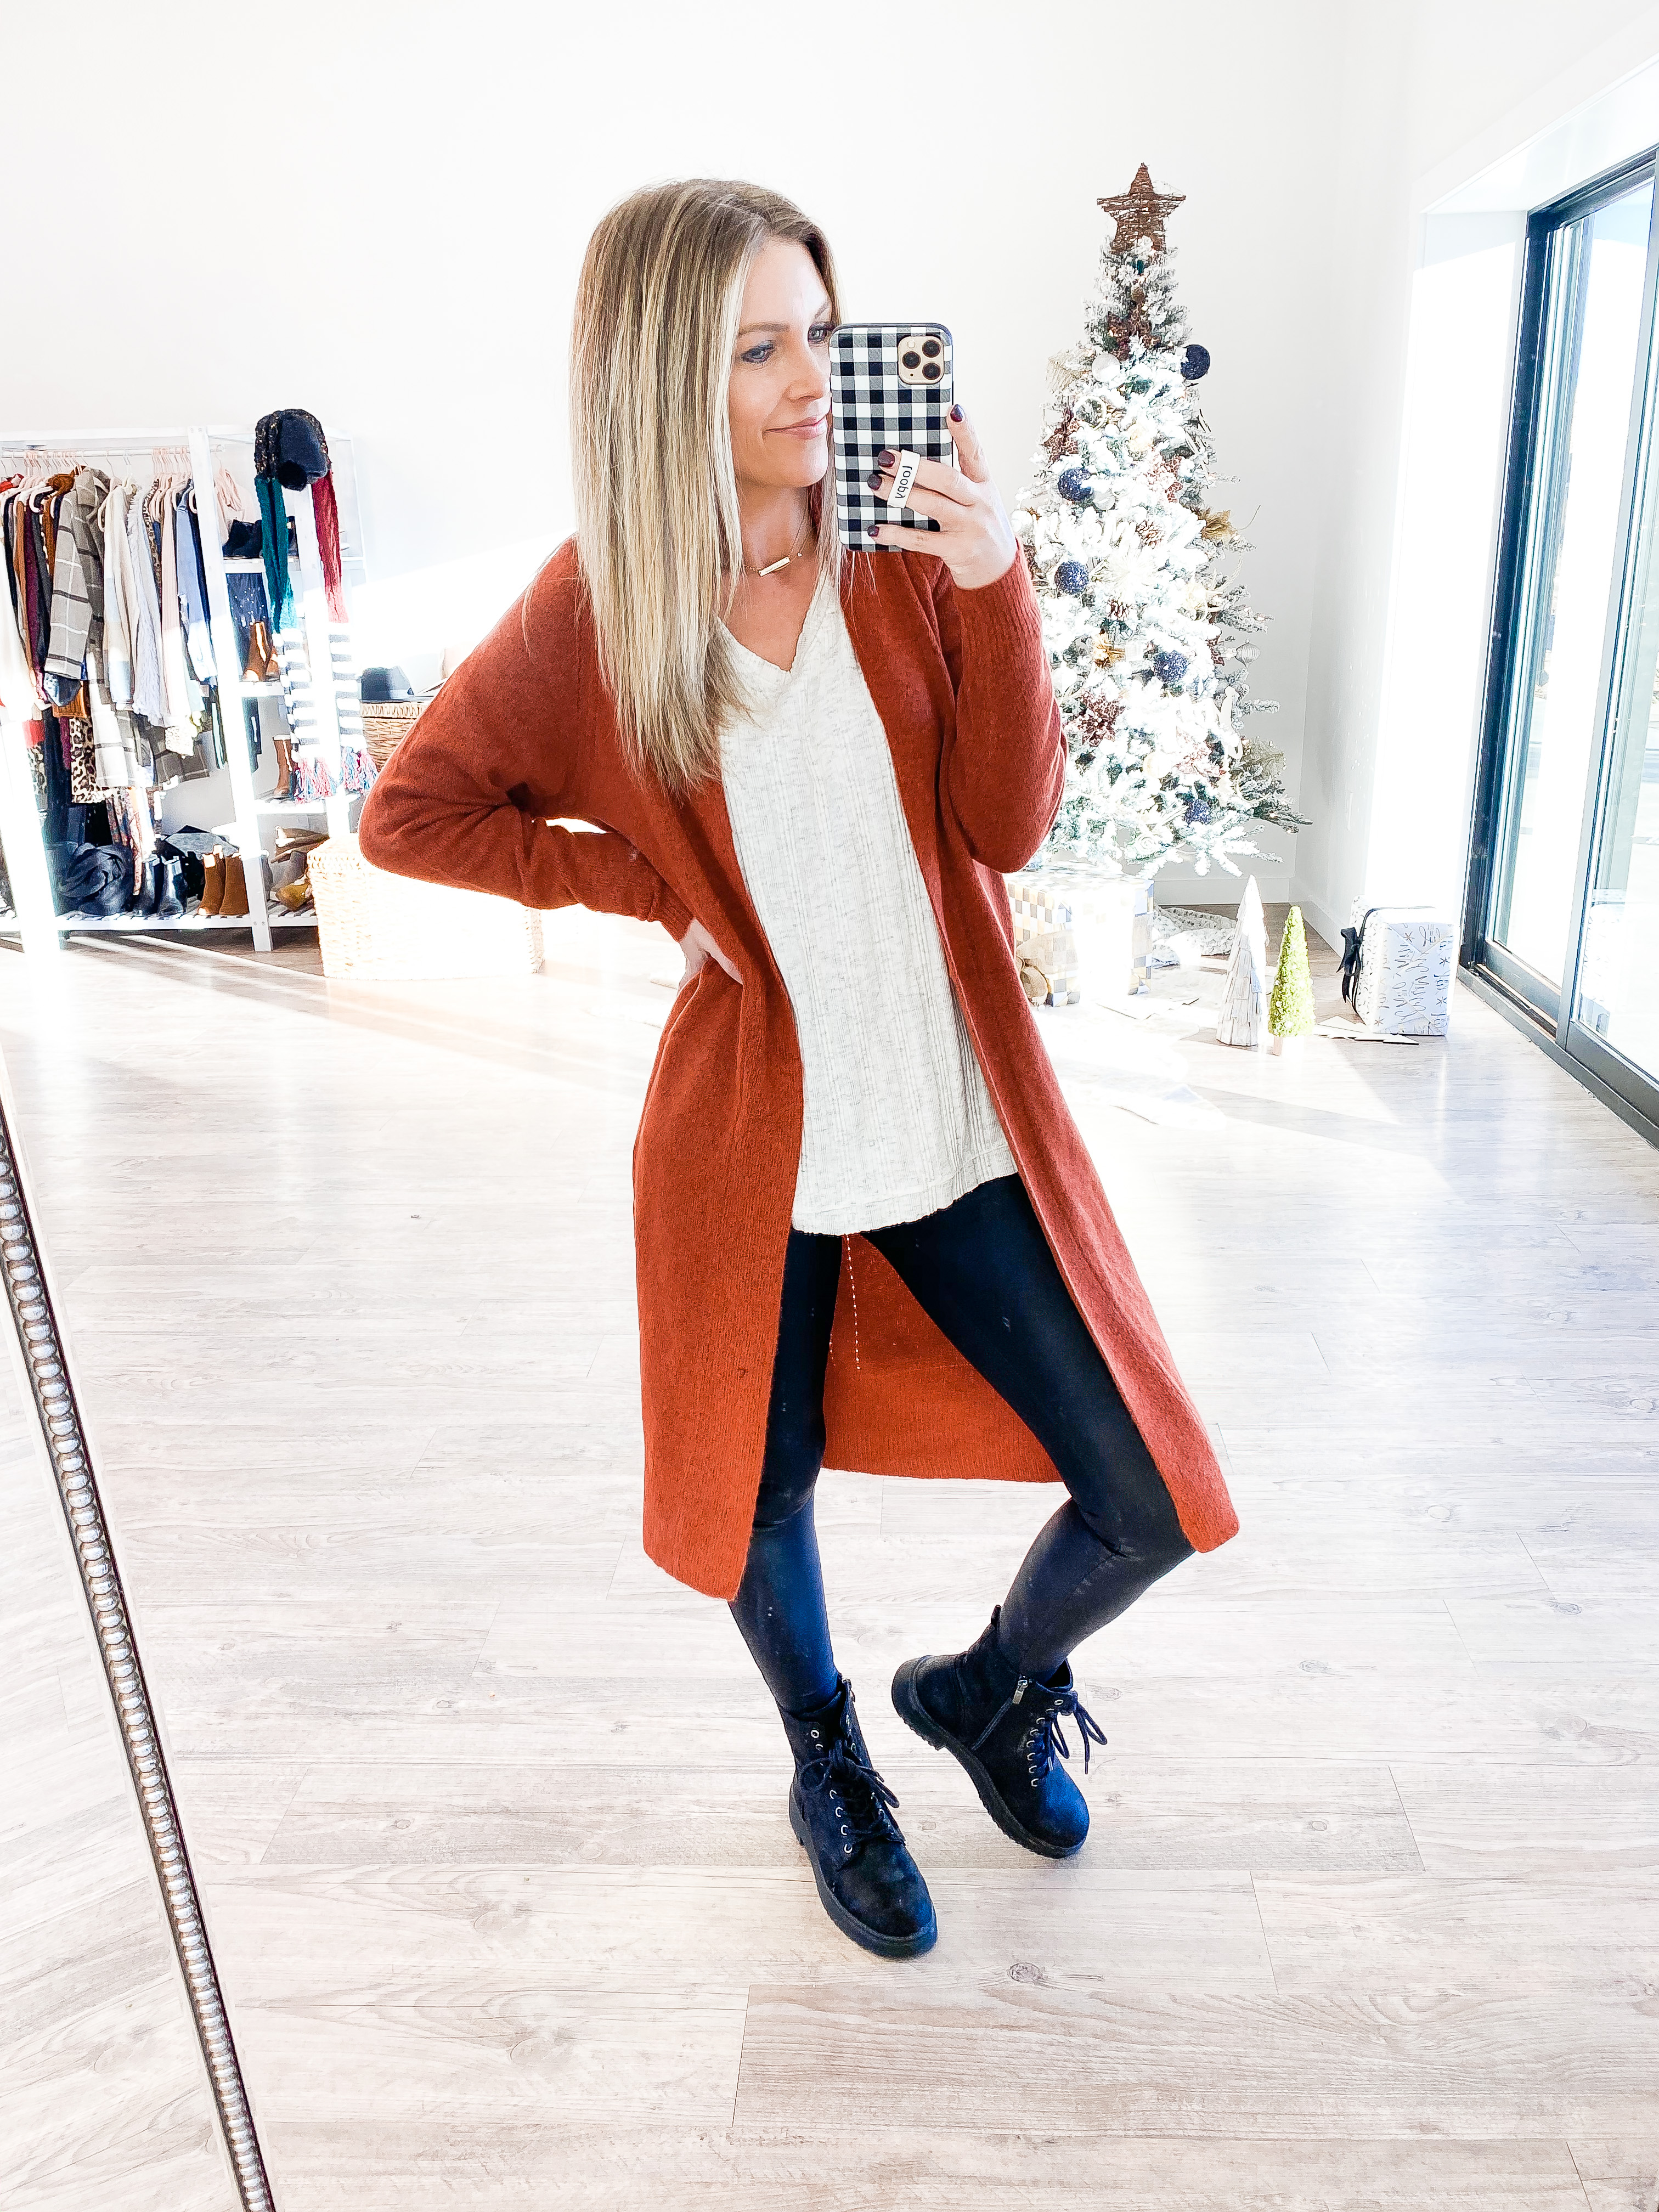 Life and Style Blogger Ashlee Nichols shares her Walmart winter fashion haul. With everyday looks that are comfortable and affordable.